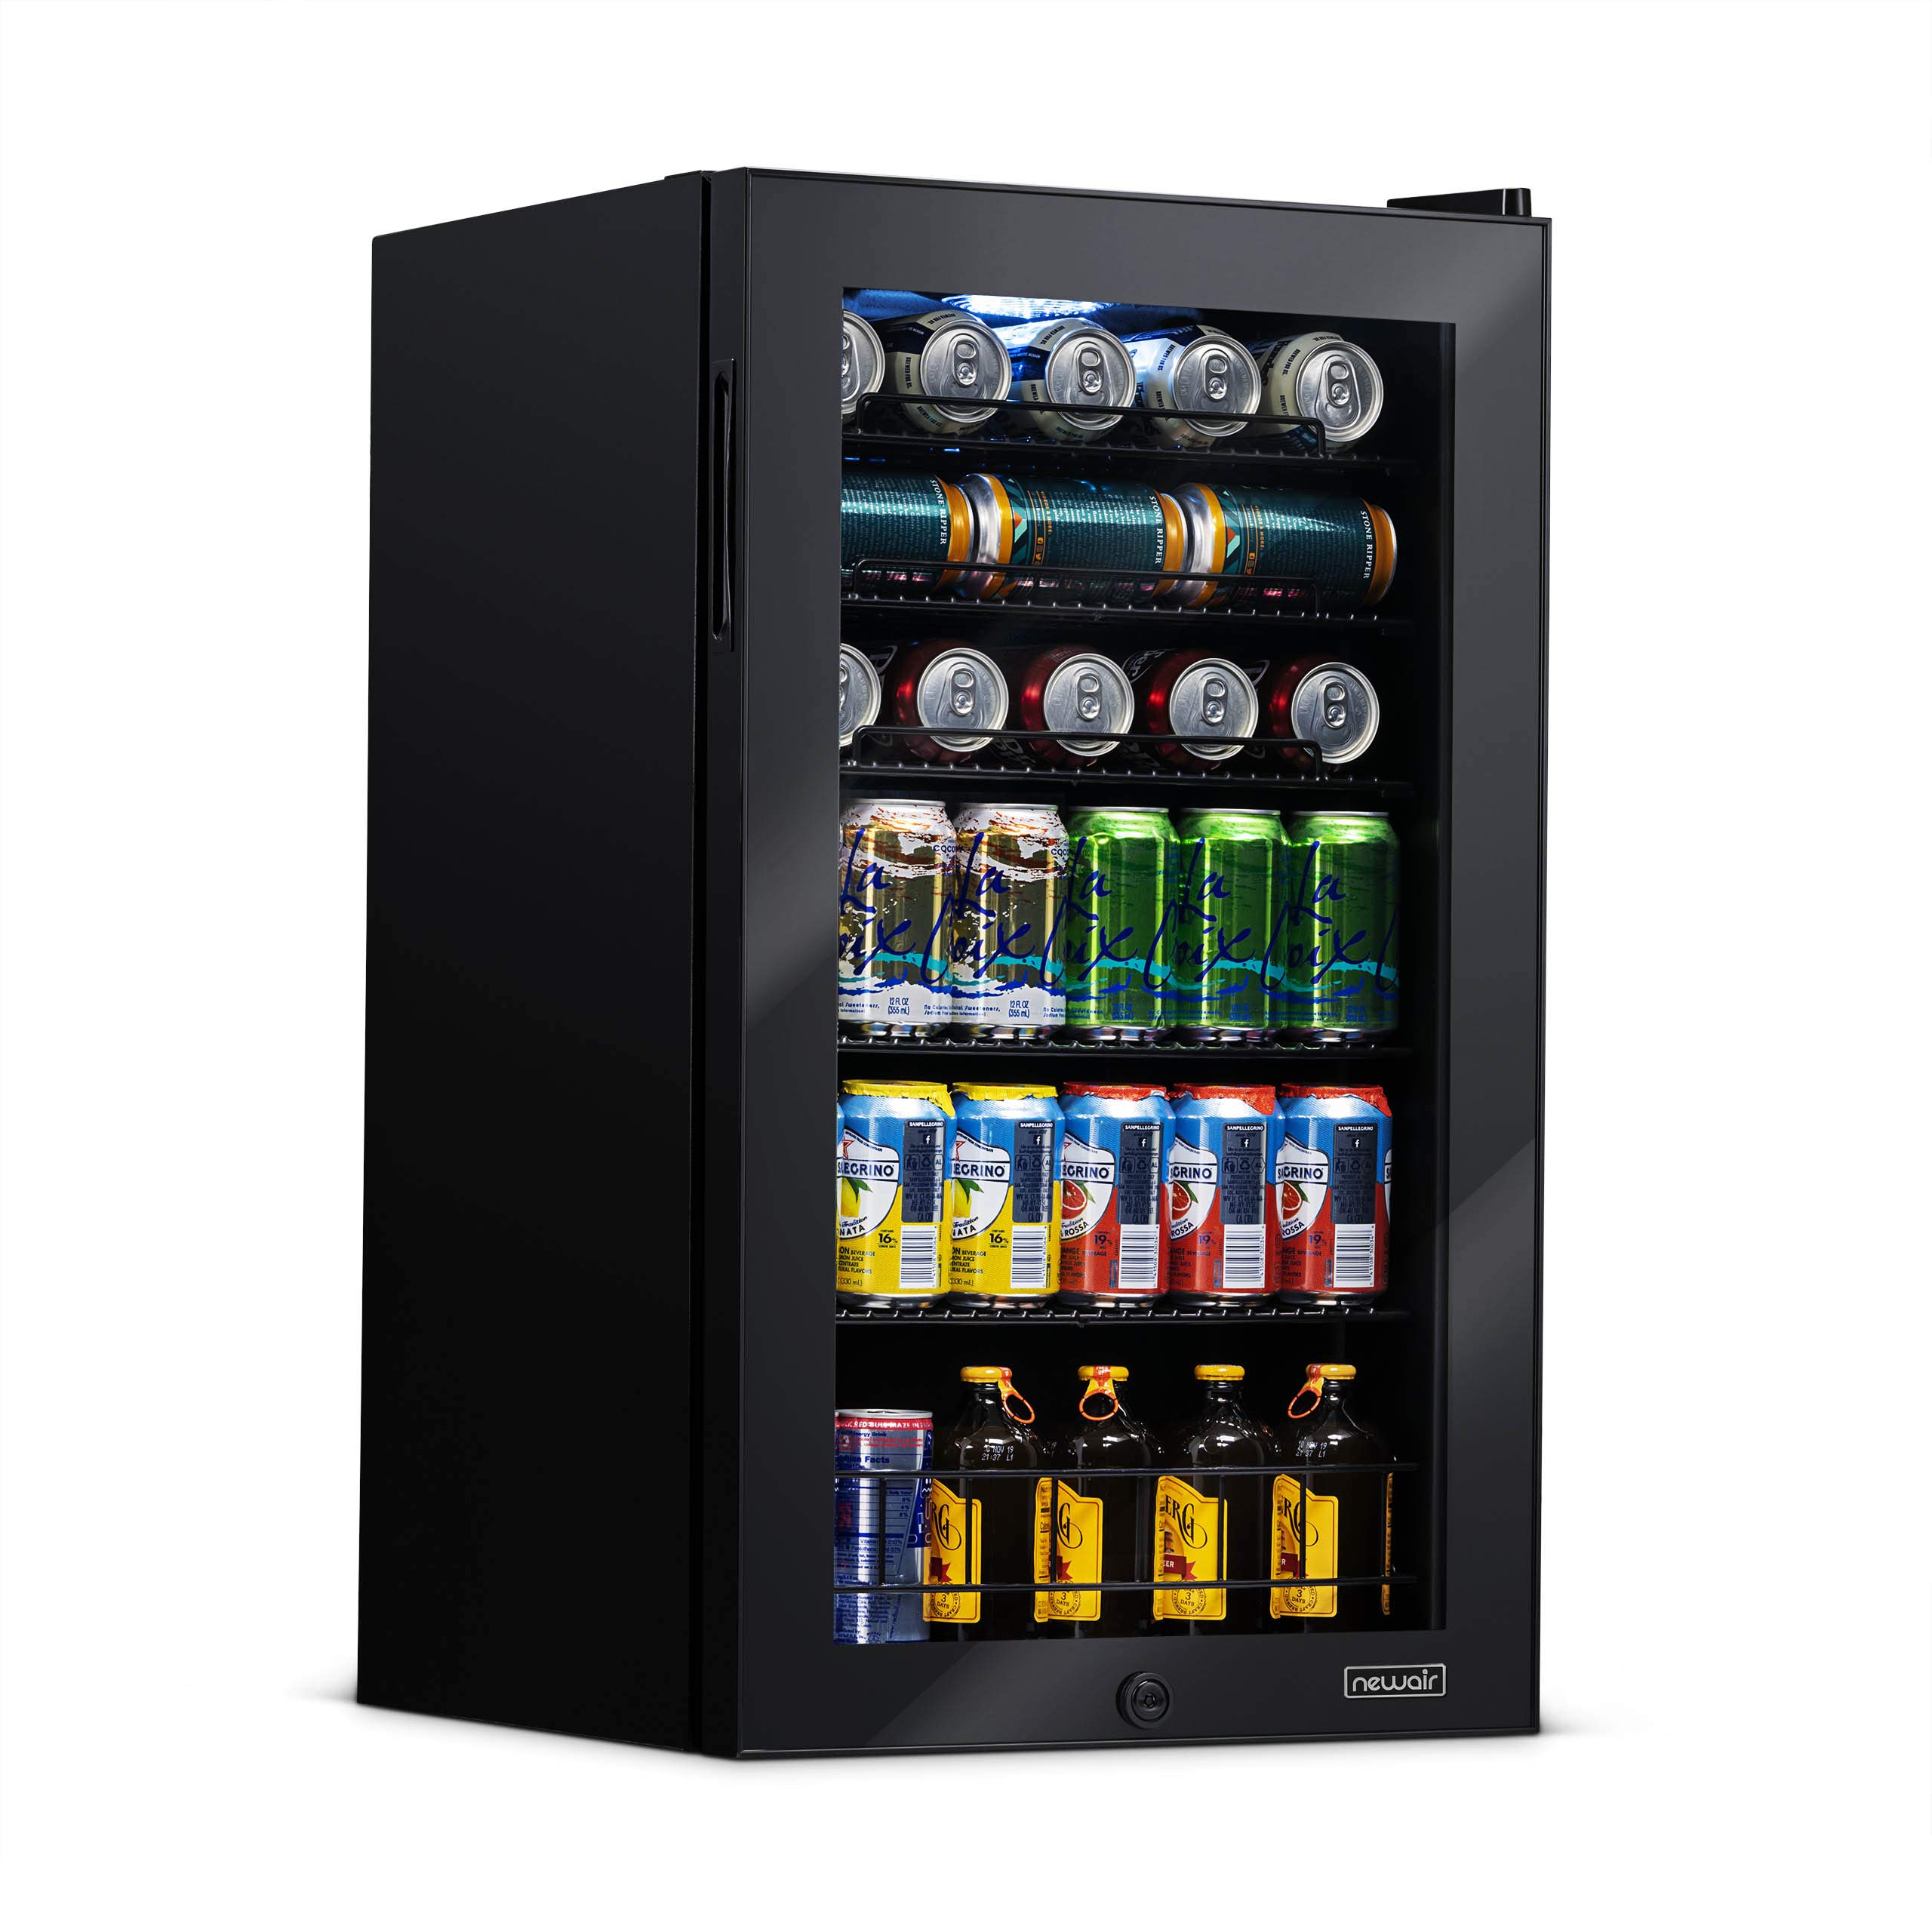 NewAir Black Beverage Refrigerator Cooler, Free Standing & WirthCo 40092 Funnel King Drip Tray - Black Plastic 22 x 22 x 1.5 Inches - Perfect for Catching Spills or Leaks from Mini Fridges